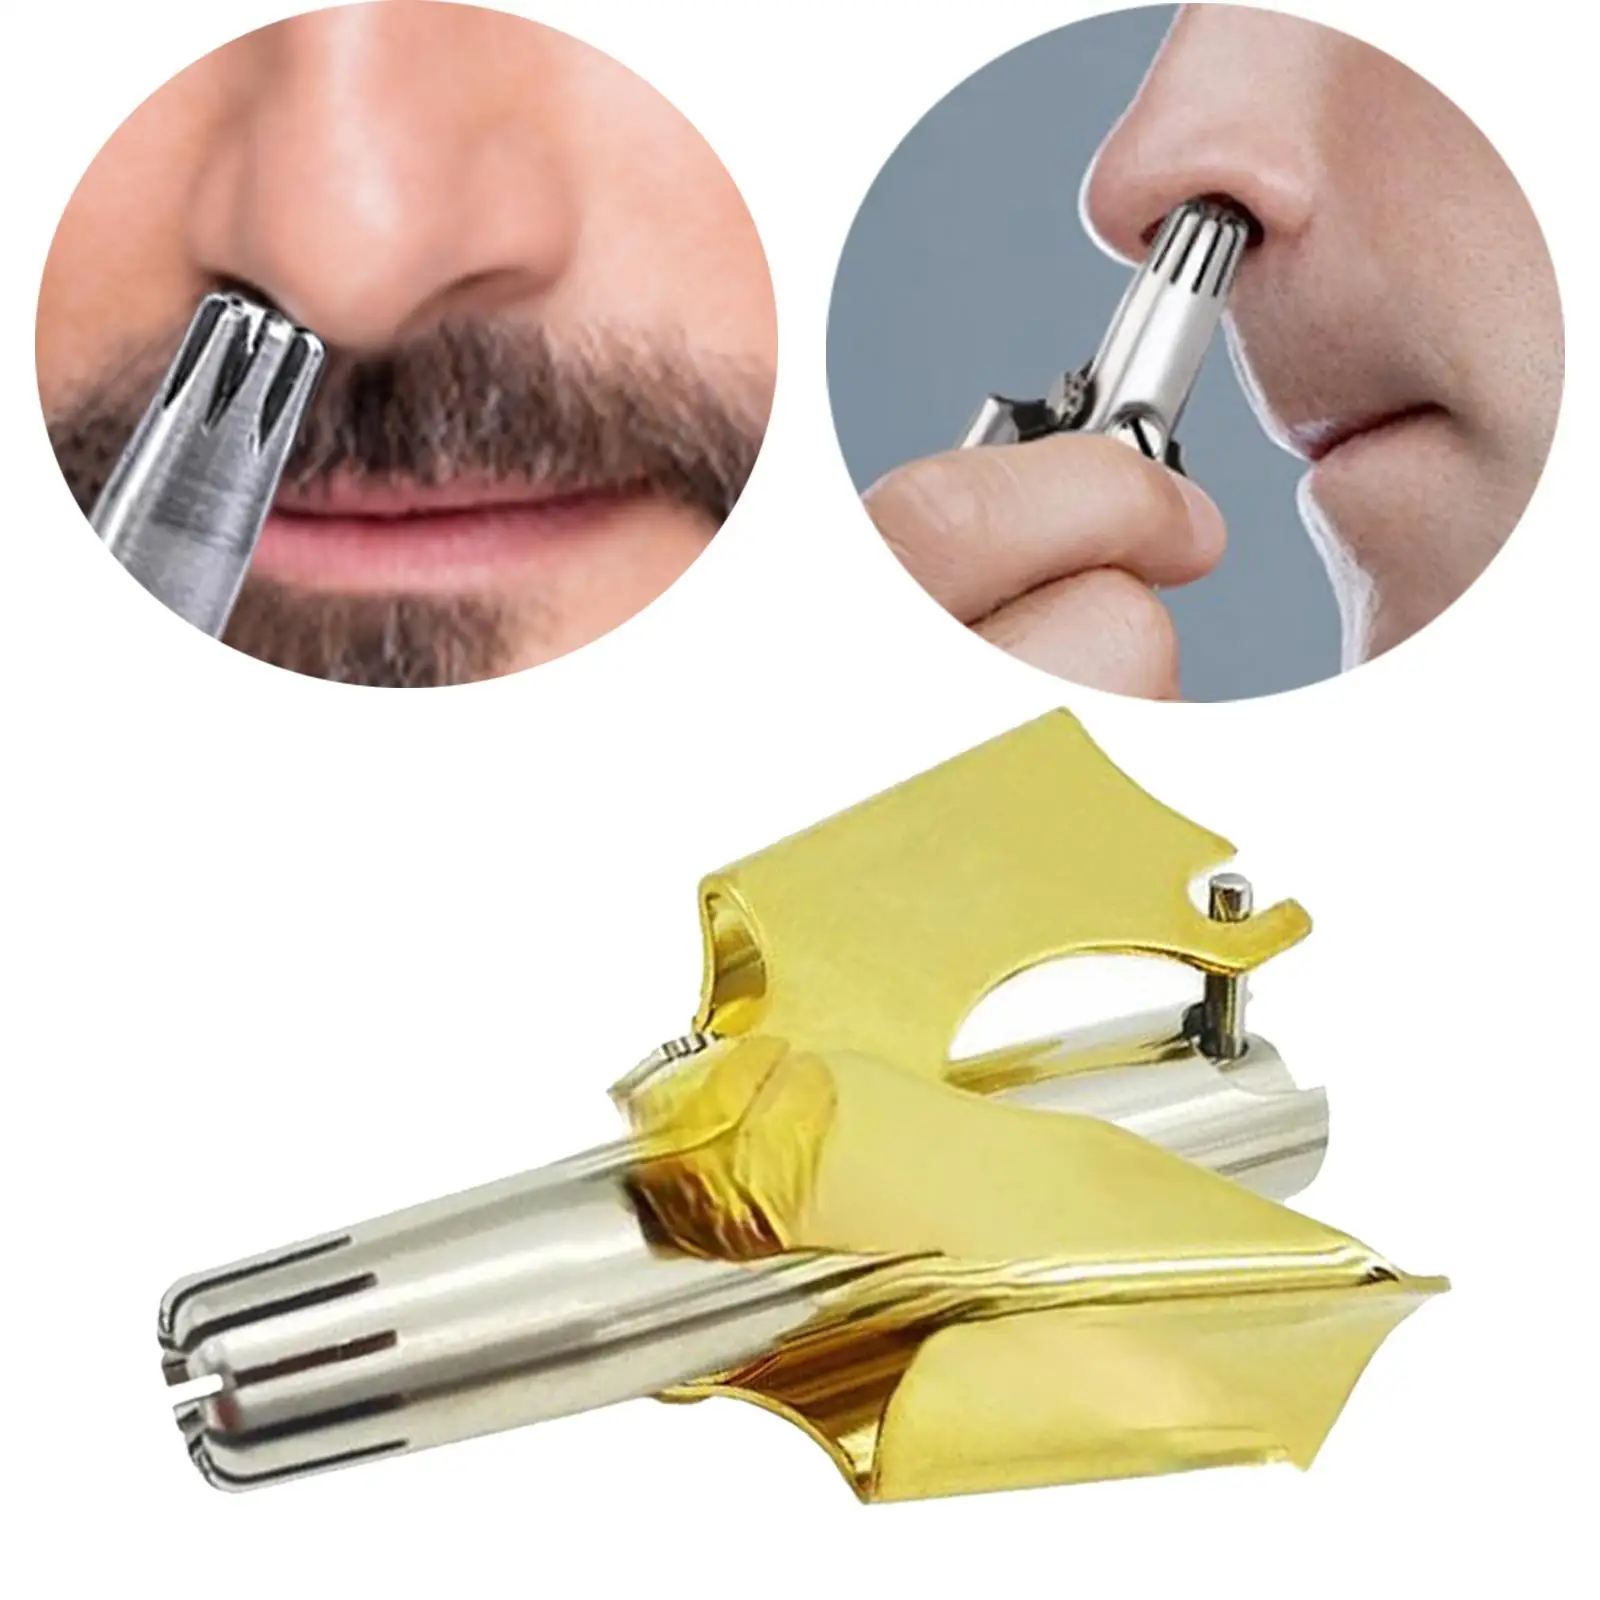 Mini Nose & Ear Hair Trimmer Whole Body Washable Nose Razor Shaver Low Manual Noise No Battery for Men Women Gift Silver Gold